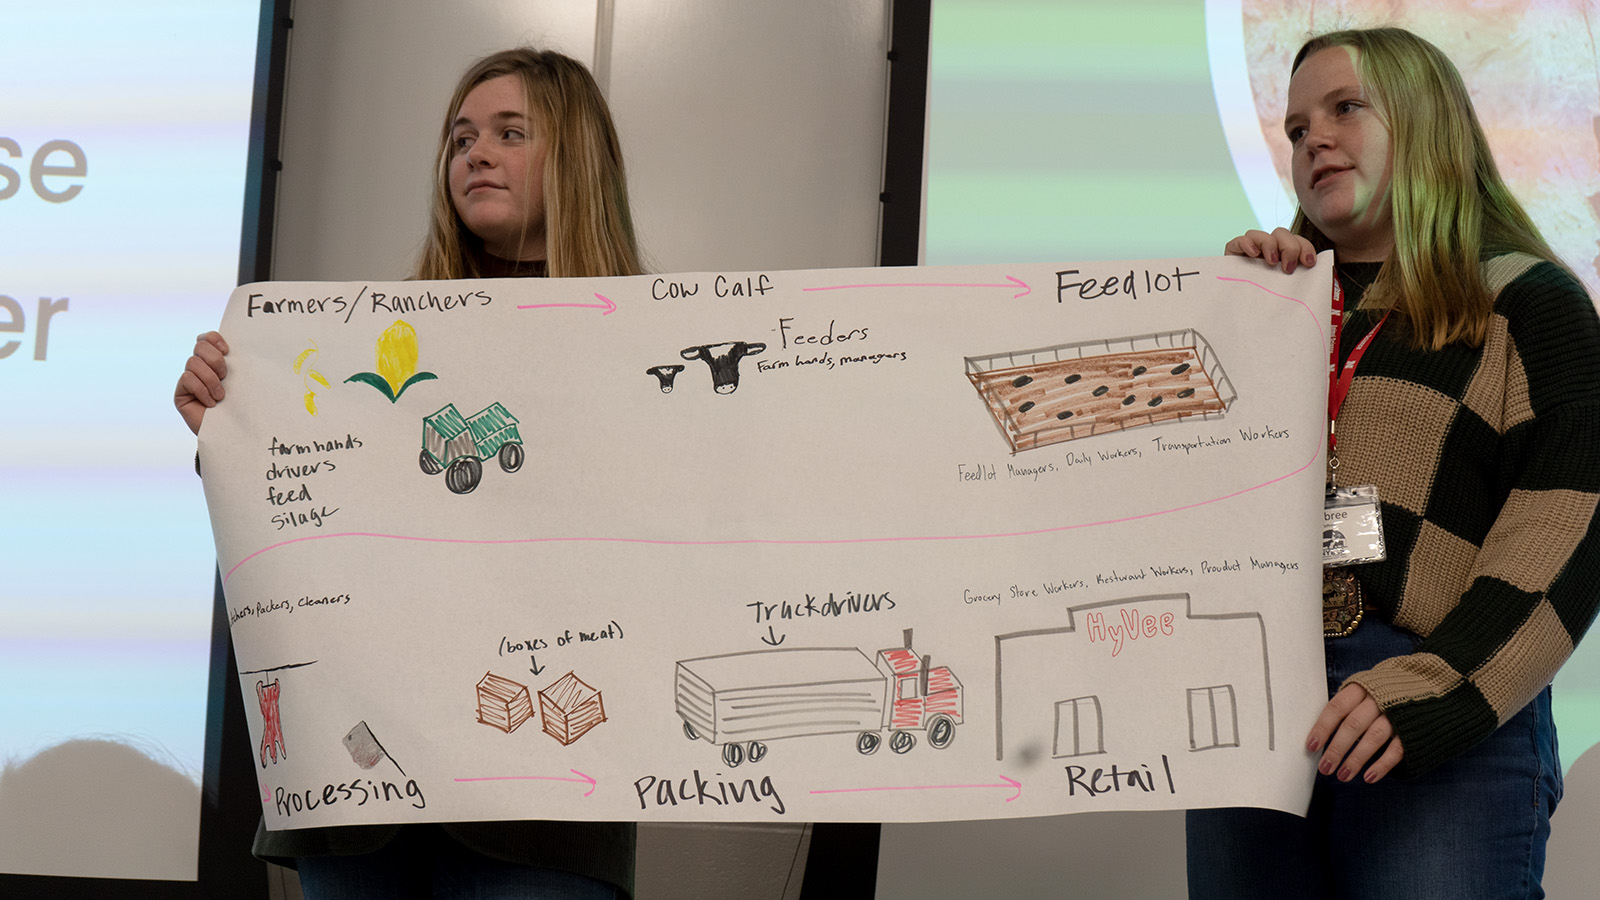 Career Opportunities In Beef Industry Explored By Youth At 18th Annual Symposium